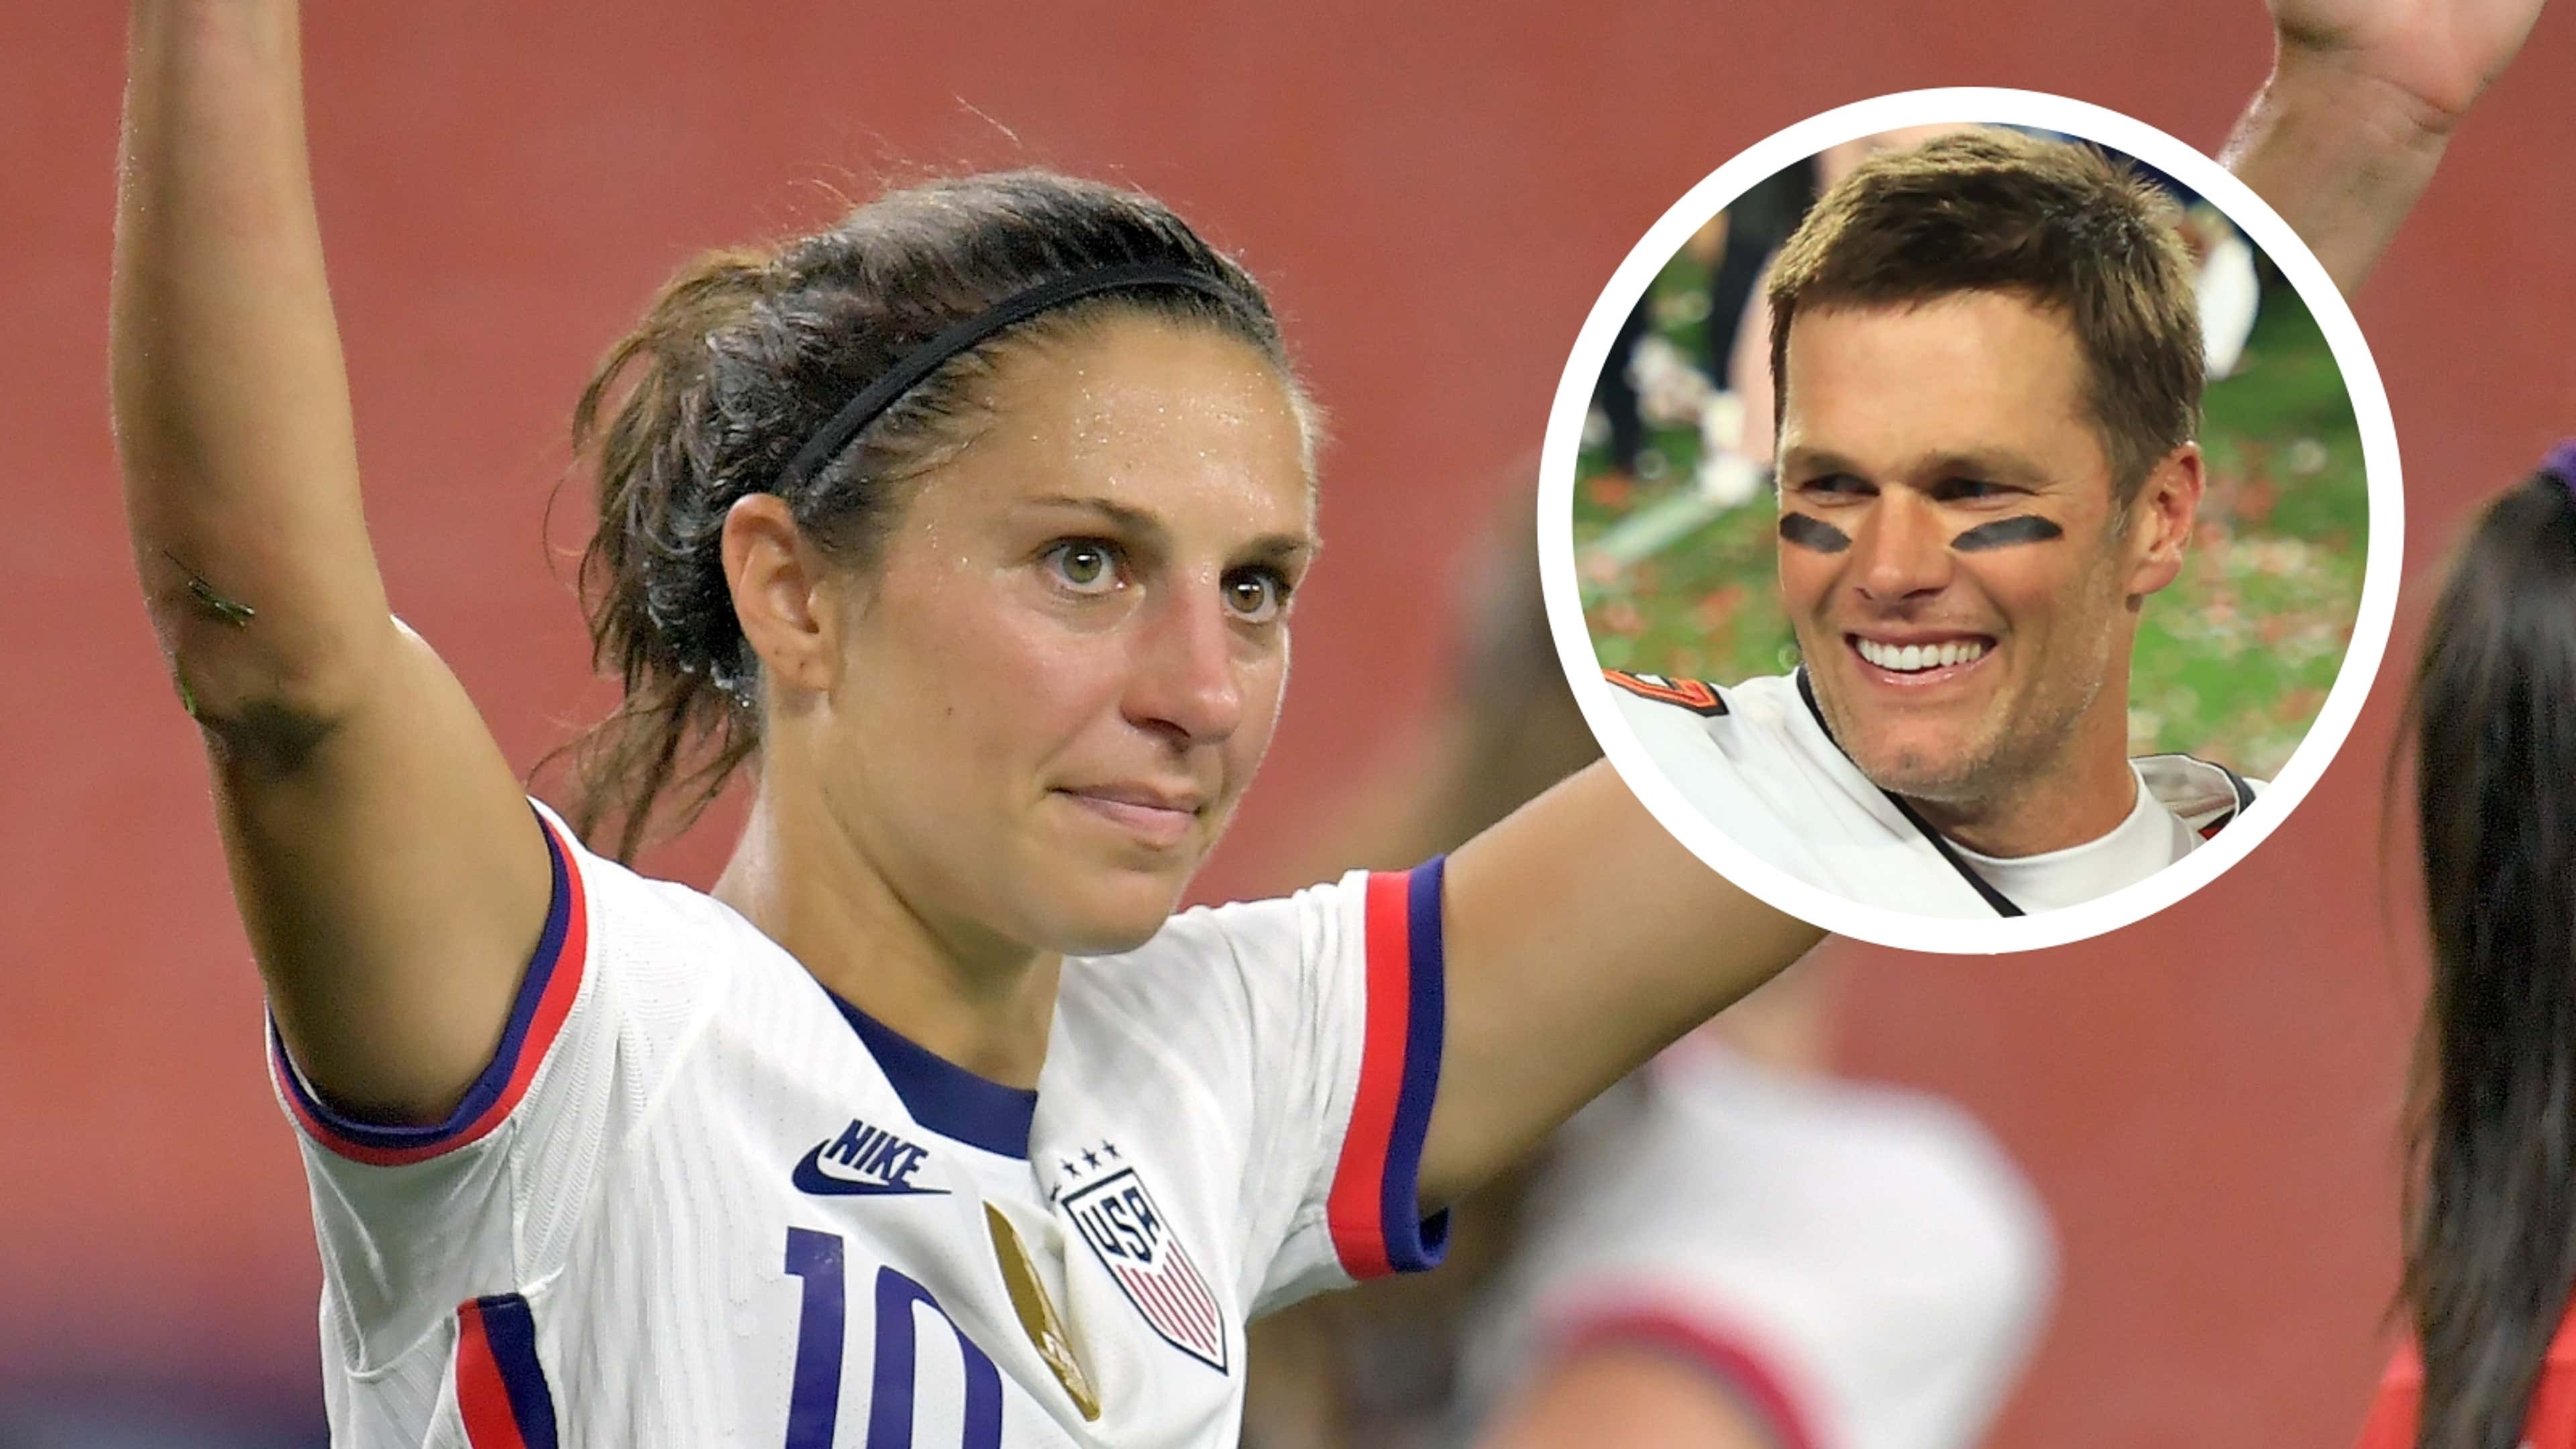 Tom Brady doesn't have to have kids!' - USWNT icon Lloyd opens up on  decision to retire and media criticism